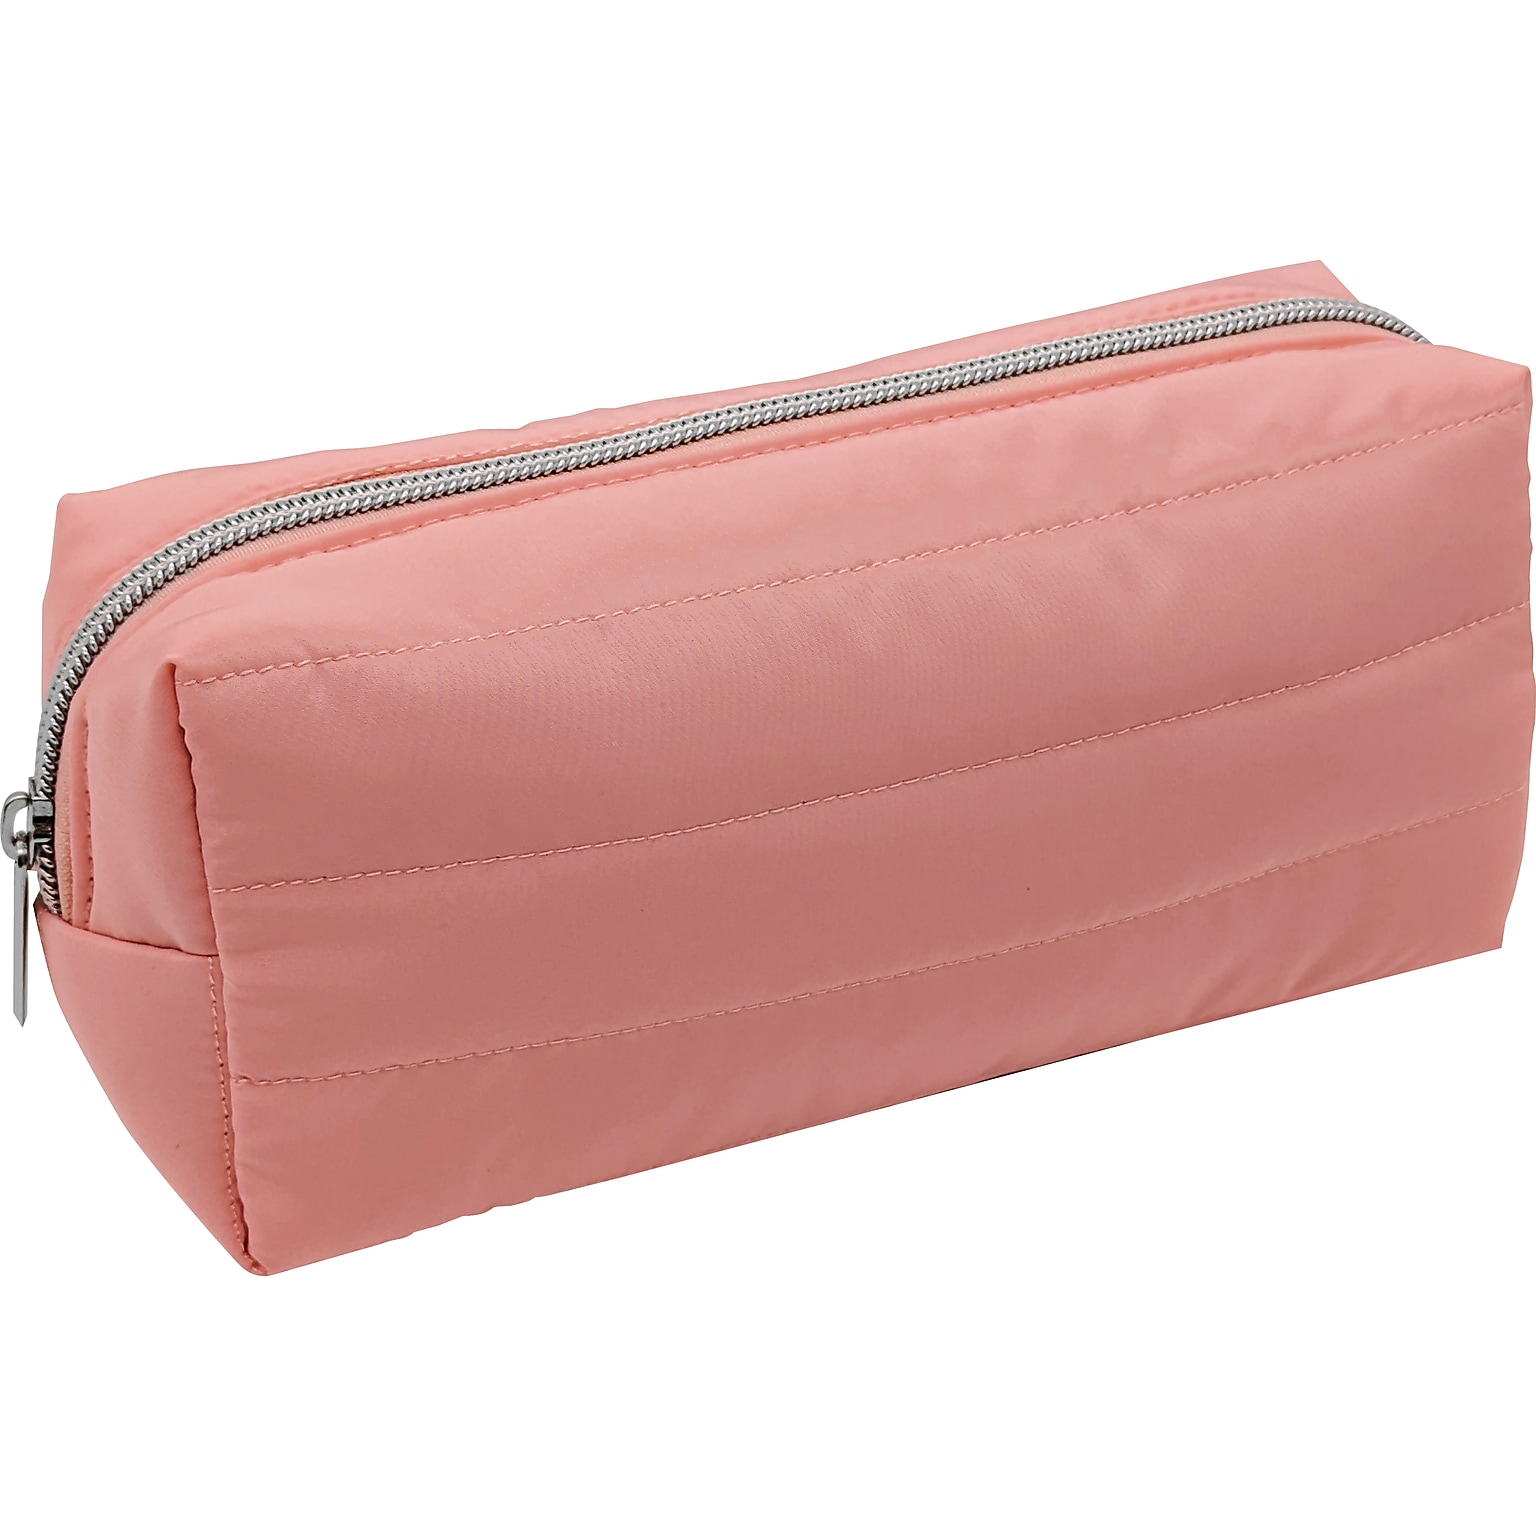 Waterproof Pencil Pouch Quilted Lightweight Portable Pen Bag for School